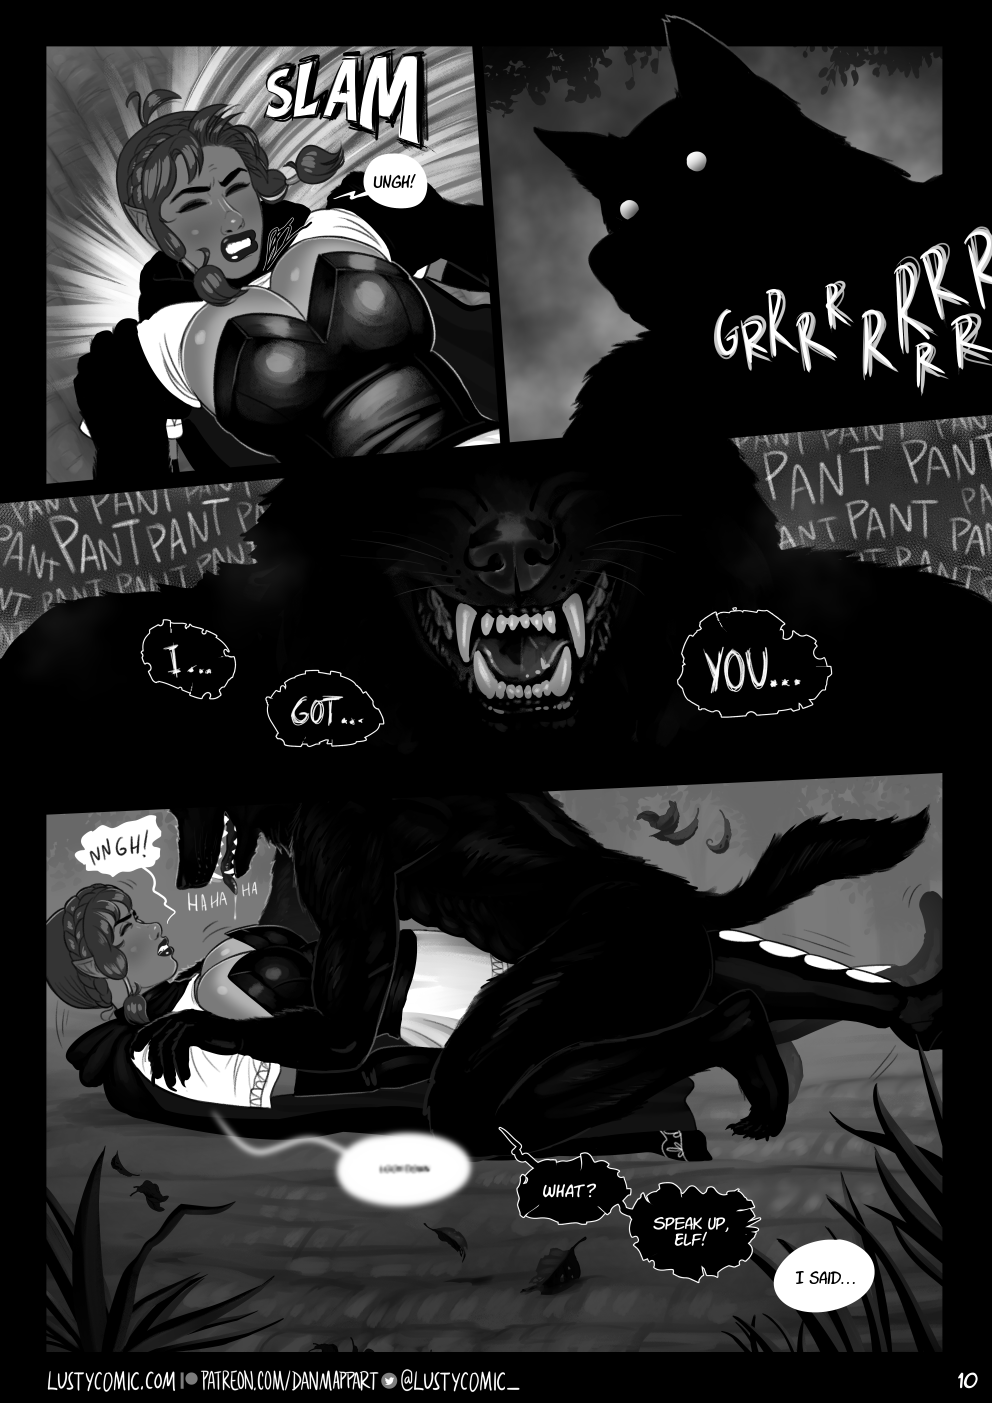 SLAM! The werewolf presses Lusty to the ground. His dark visage looms over her, eyes glowing softly in the moonlight. Panting heavily, he growls "I... Got... You...". Lusty struggles, but she is unable to break free. The werewolf laughs. Lusty says something too quiet for the werewolf to hear. "What?" he barks. "Speak up, elf!". In a stronger voice, Lusty begins her answer "I said..."